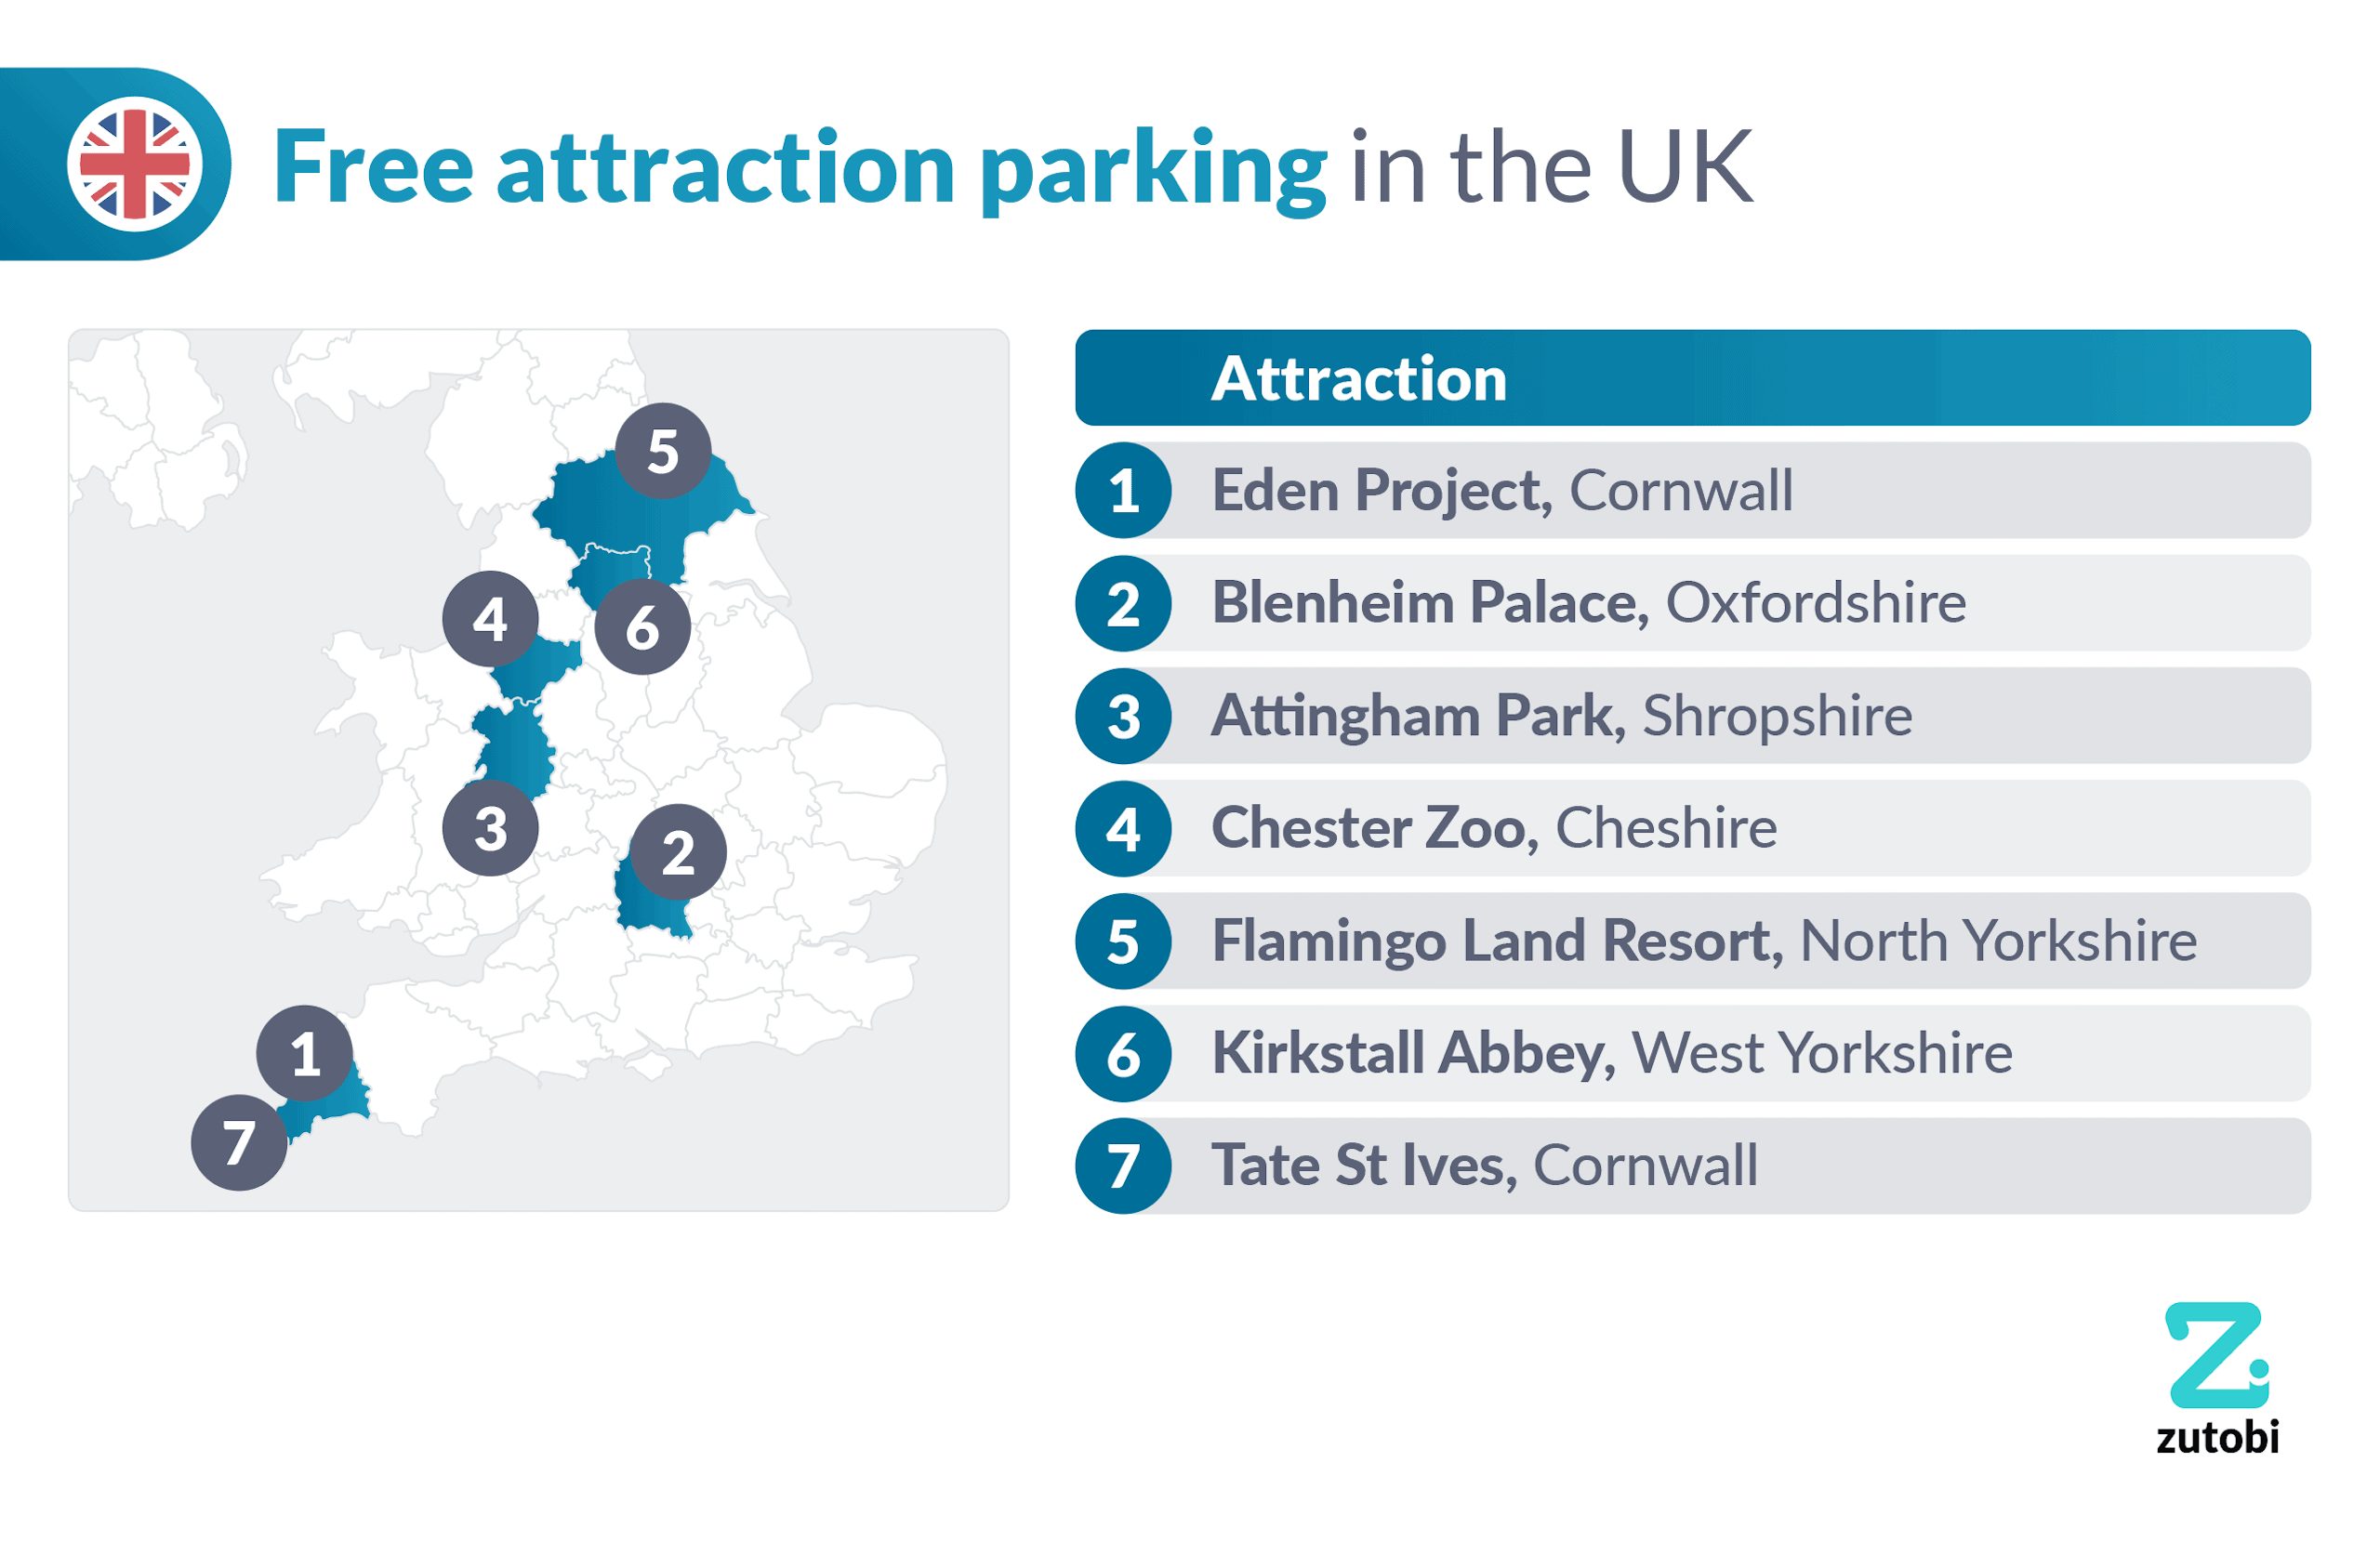 Attractions with free parking in the UK